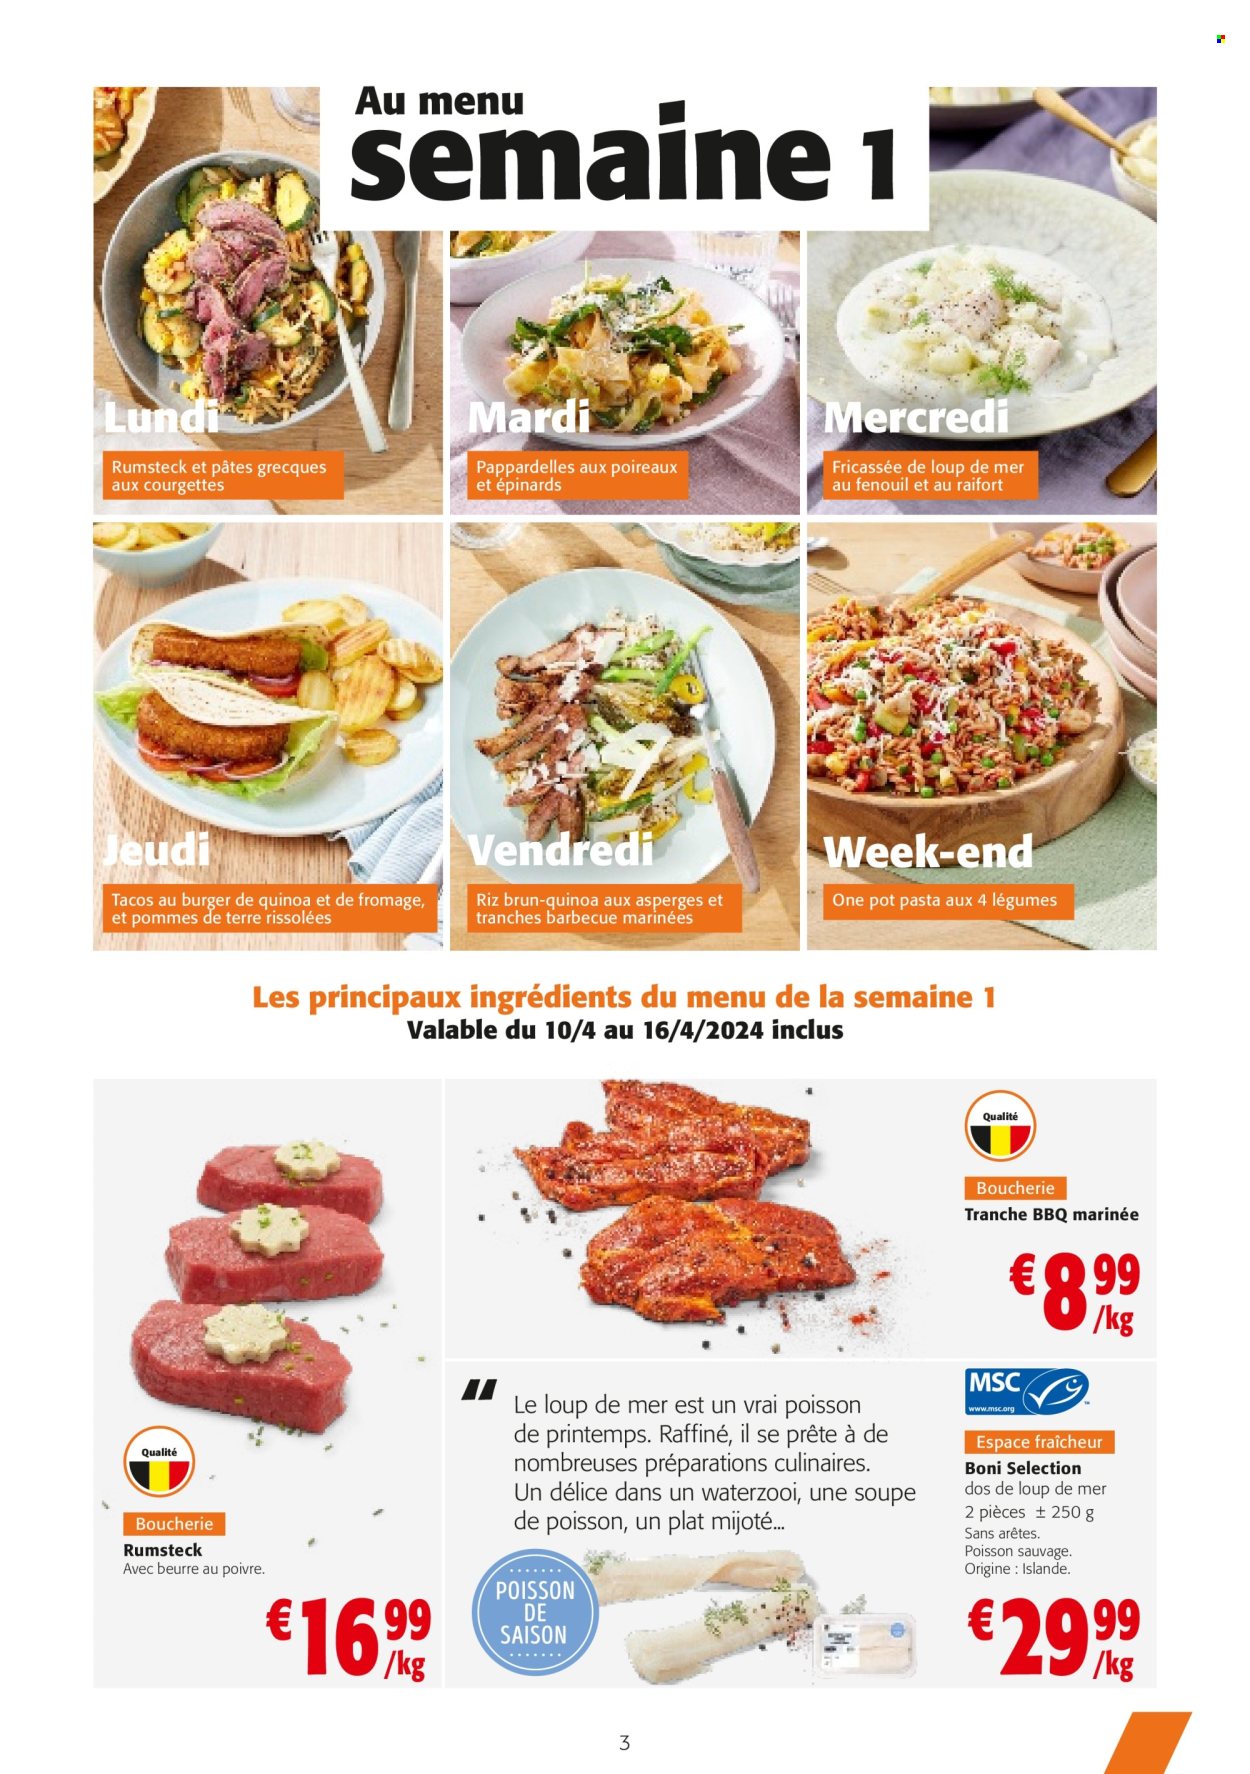 Catalogue Colruyt - 10.4.2024 - 23.4.2024. Page 3.